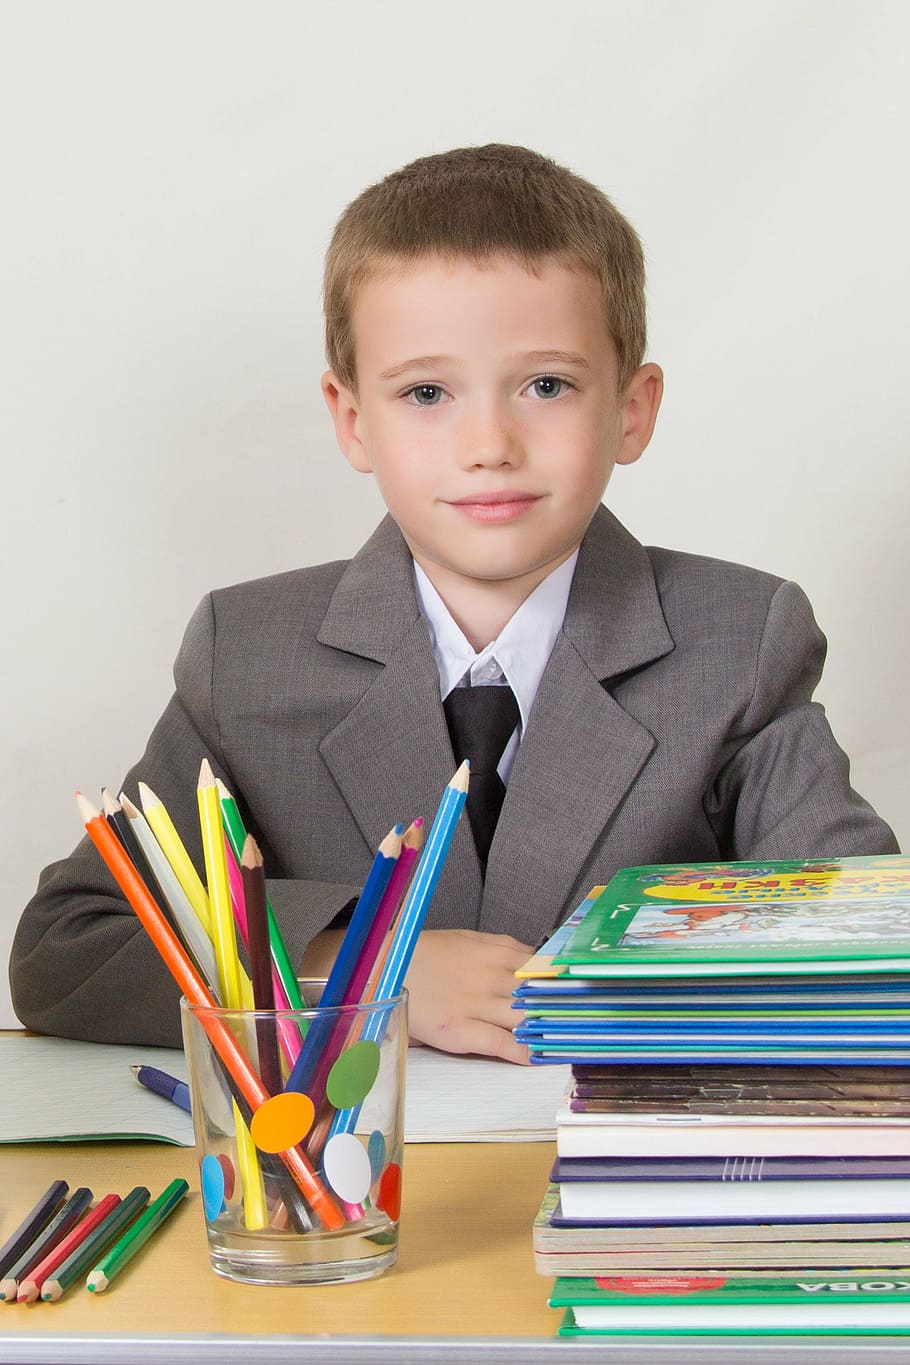 schoolboy, at the desk, sitting, books, pencils, bright, notebook, child, education, learning